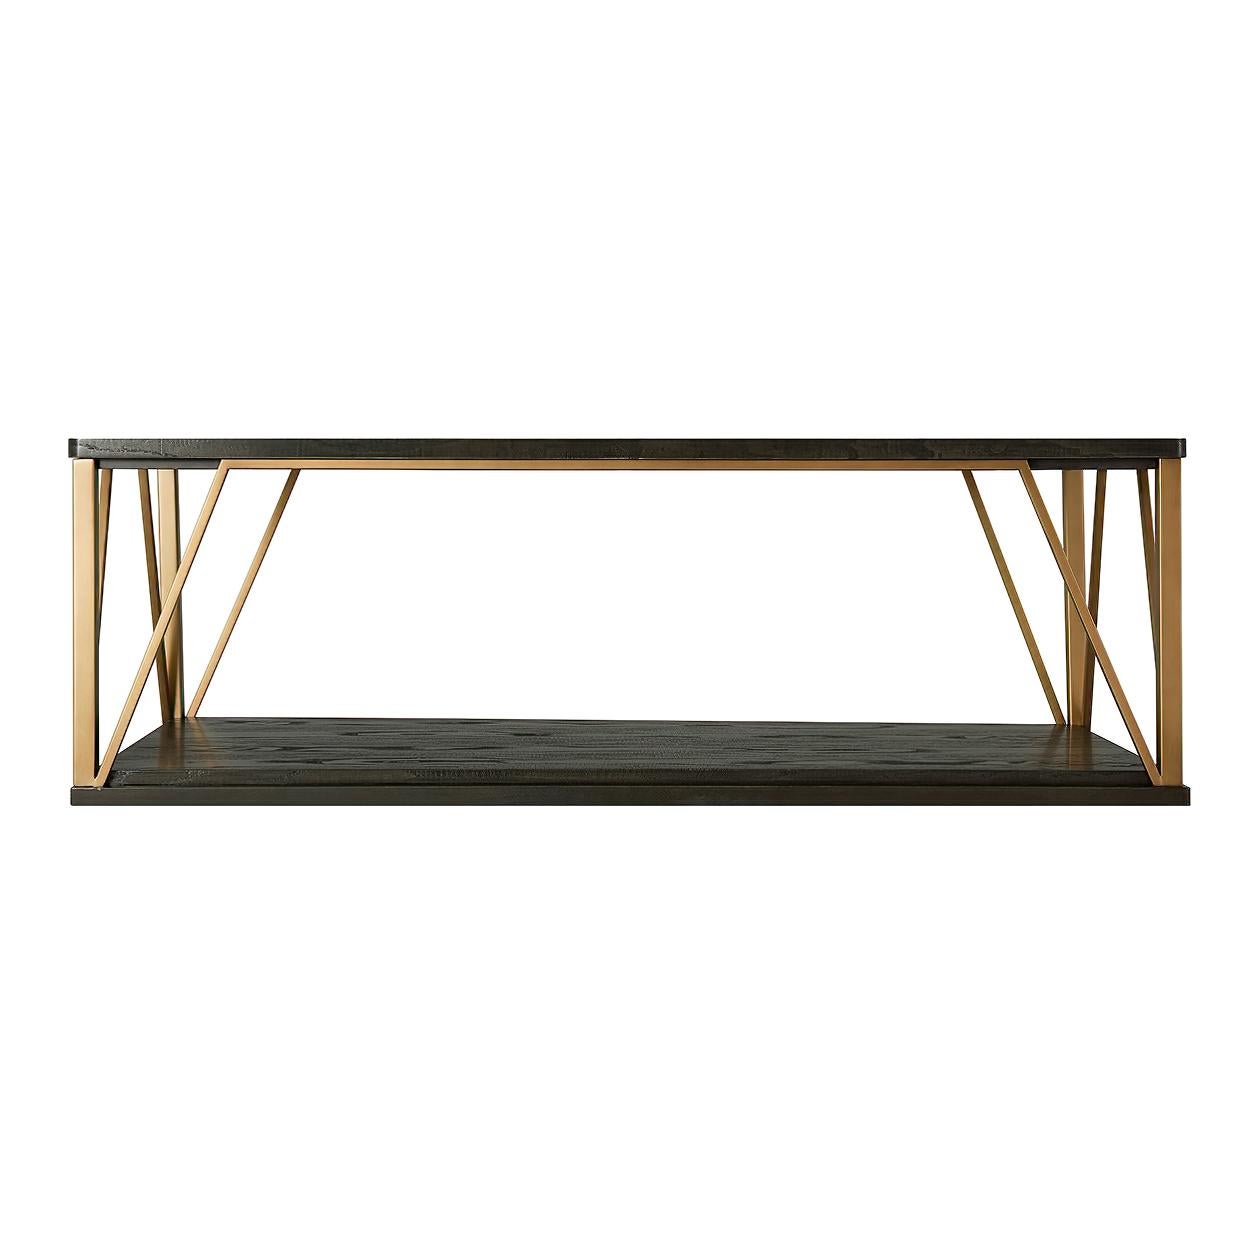 French Art Deco style cocktail table with an ash veneered rectangular top, with geometric bronze finished supports on an Ash veneered base.

Dimensions: 58